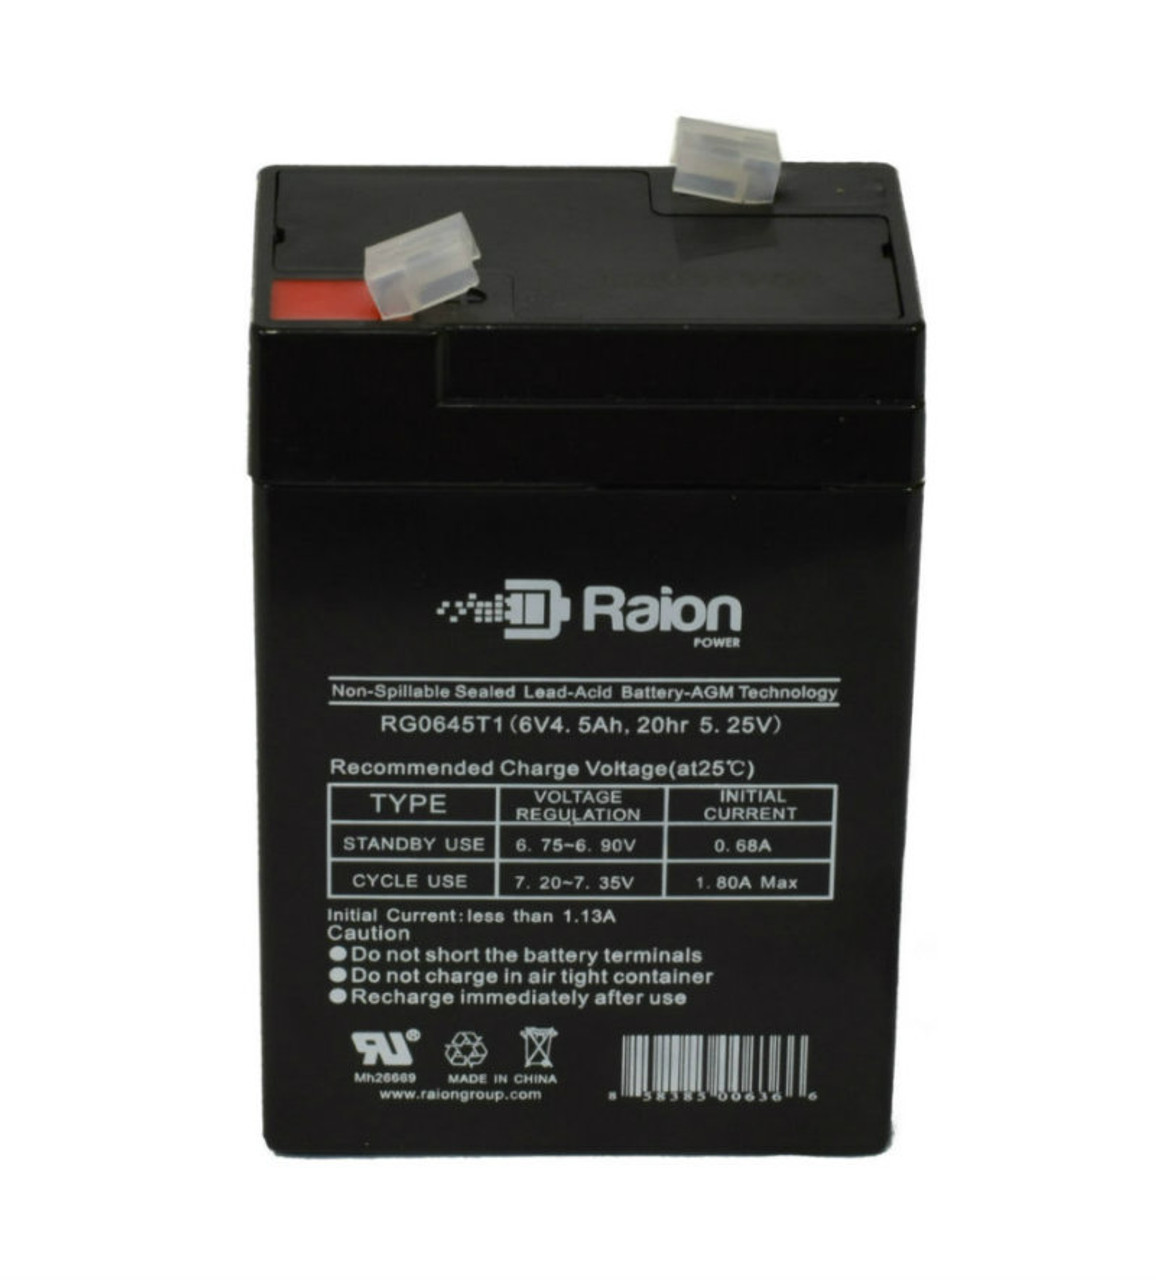 Raion Power RG0645T1 Replacement Battery Cartridge for SES BT4-6(I)